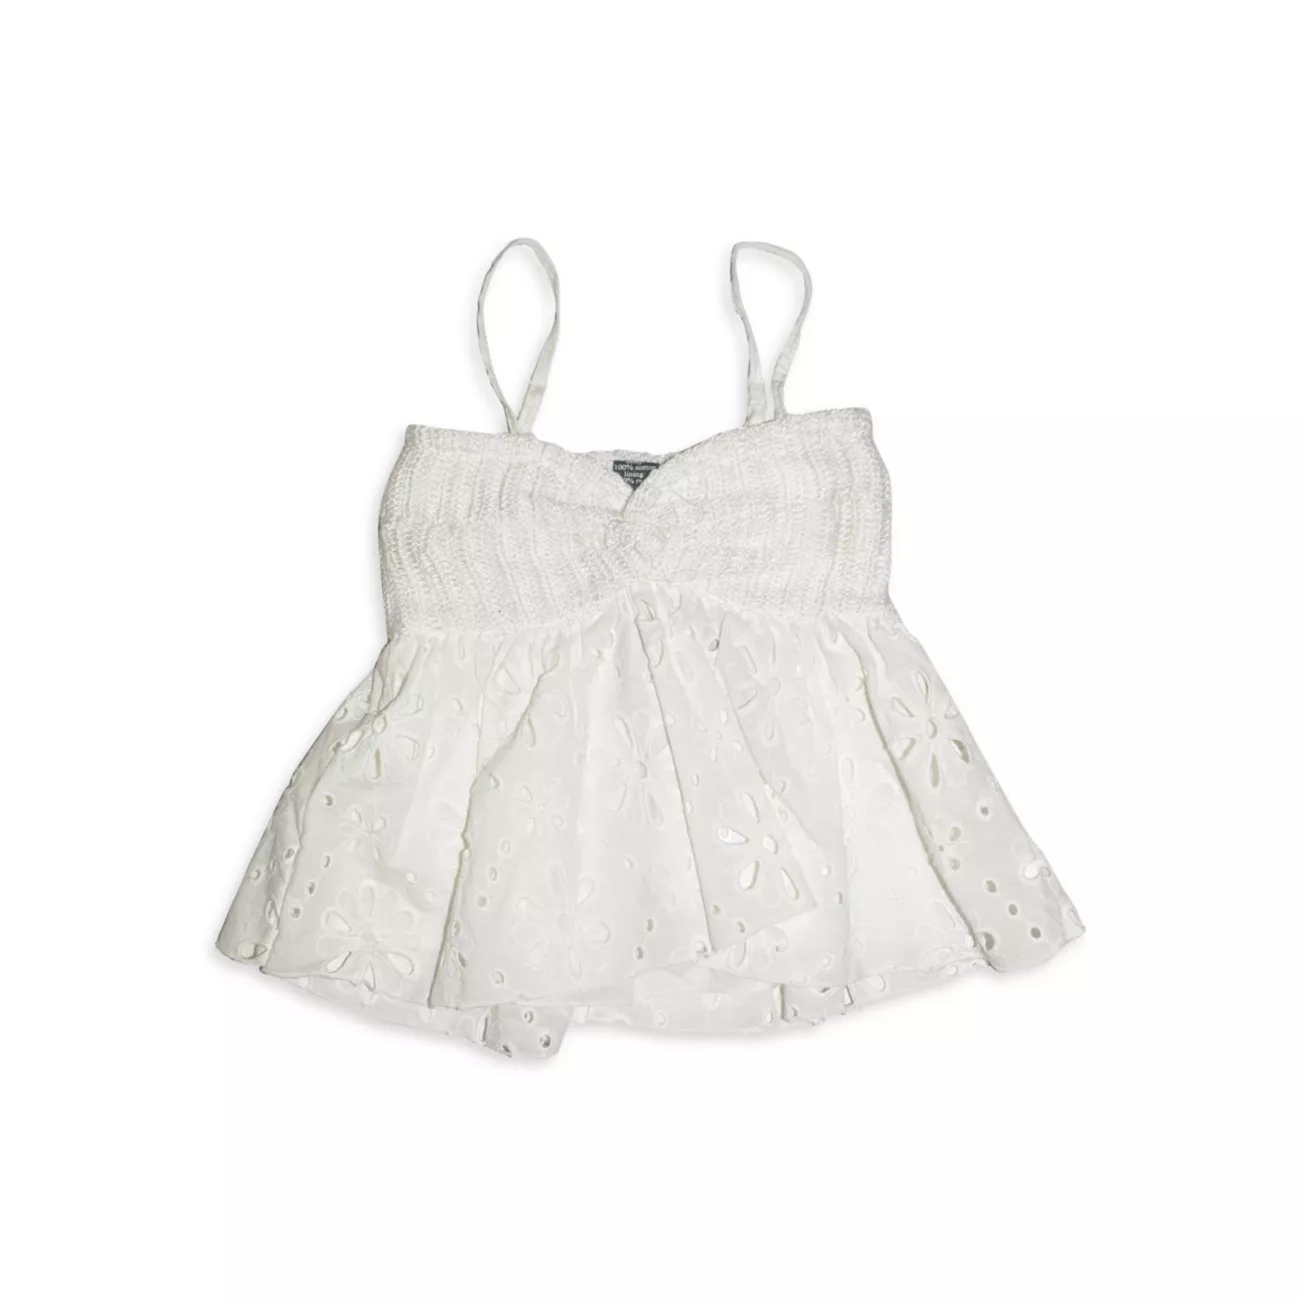 Girl's Eyelet Camisole Top Flowers By Zoe